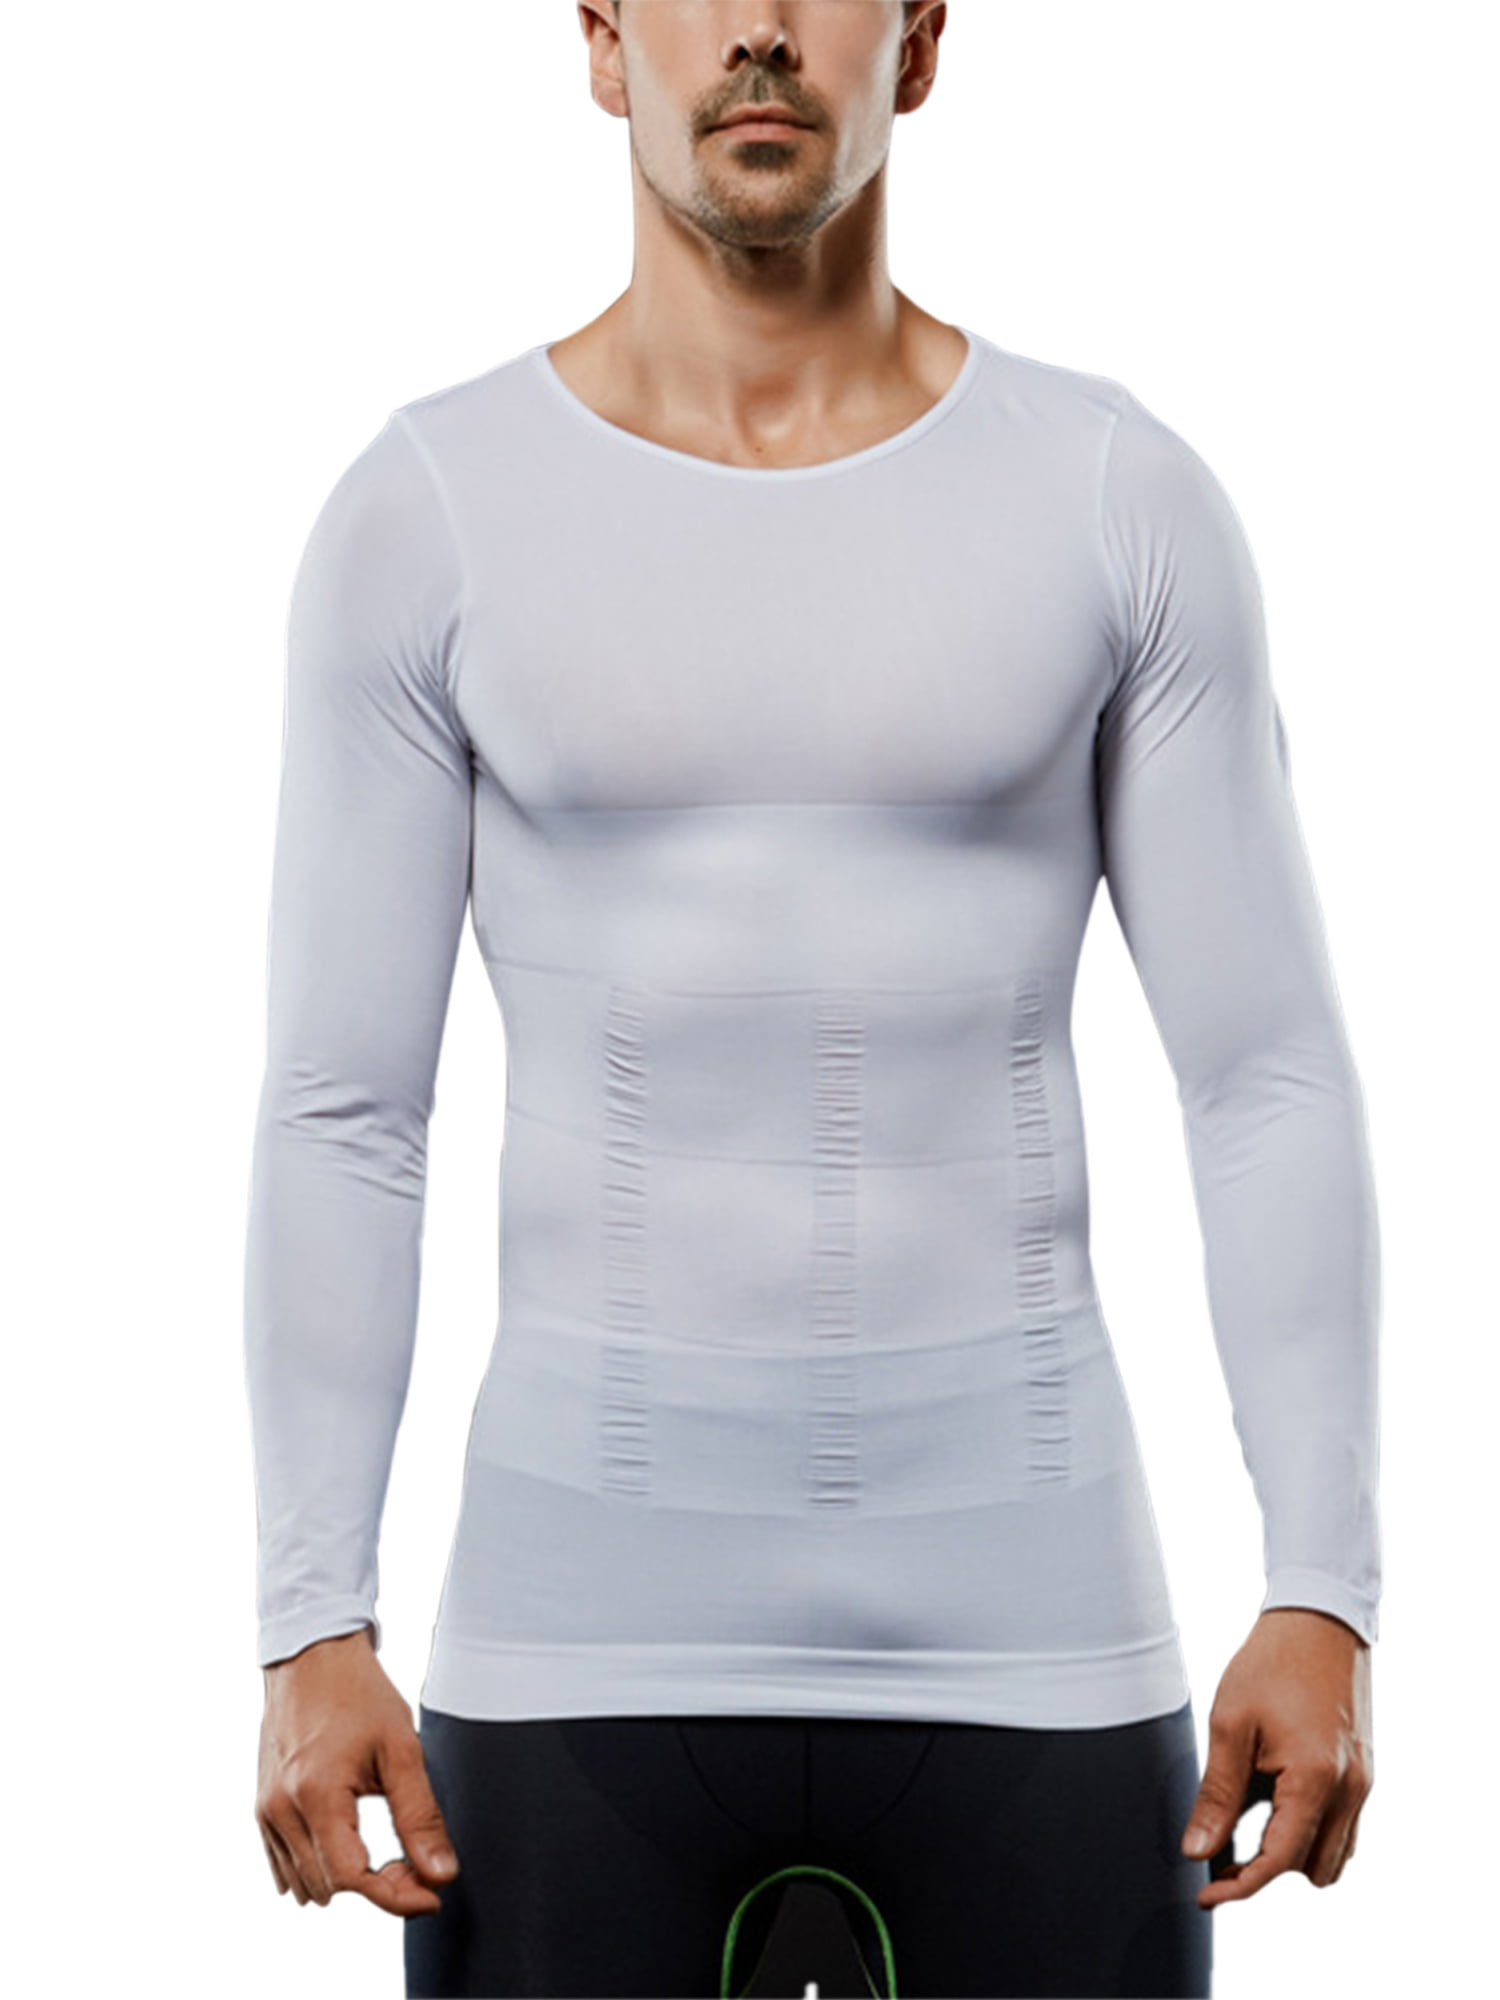 Men Compression Shirt Base Layer Long Sleeve Undershirt for Men Sport Fitness Cool Dry